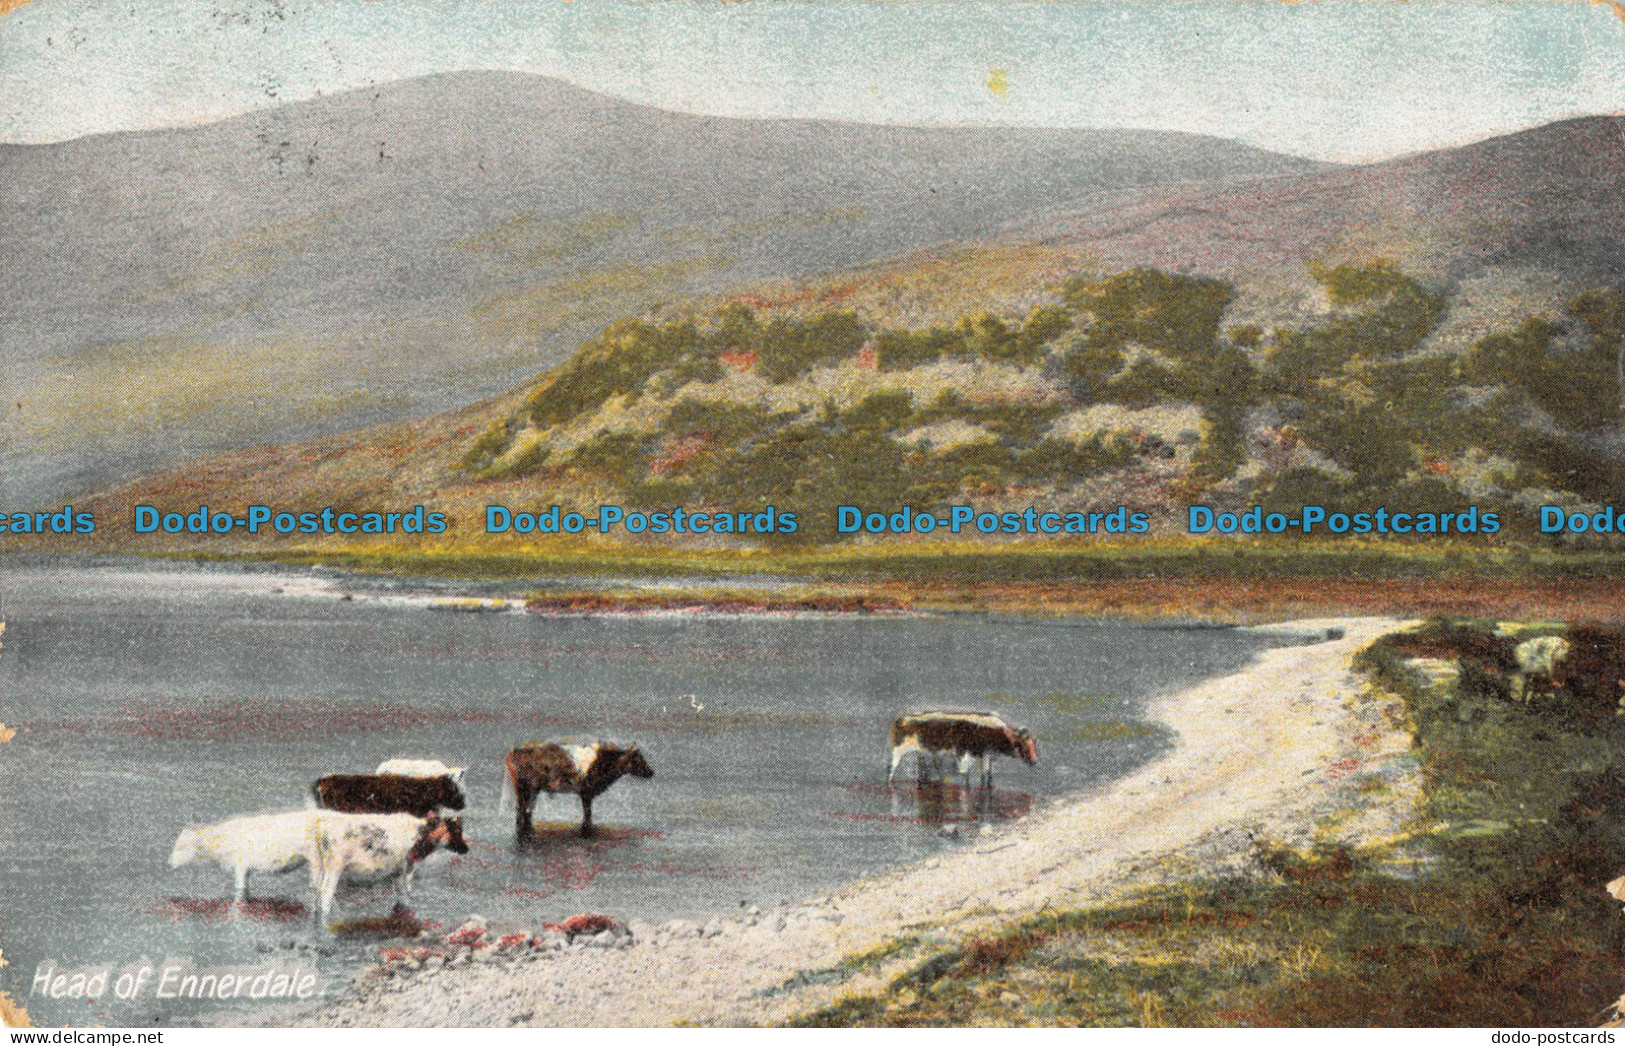 R094334 Head Of Ennerdale. Commercial. 1910 - World